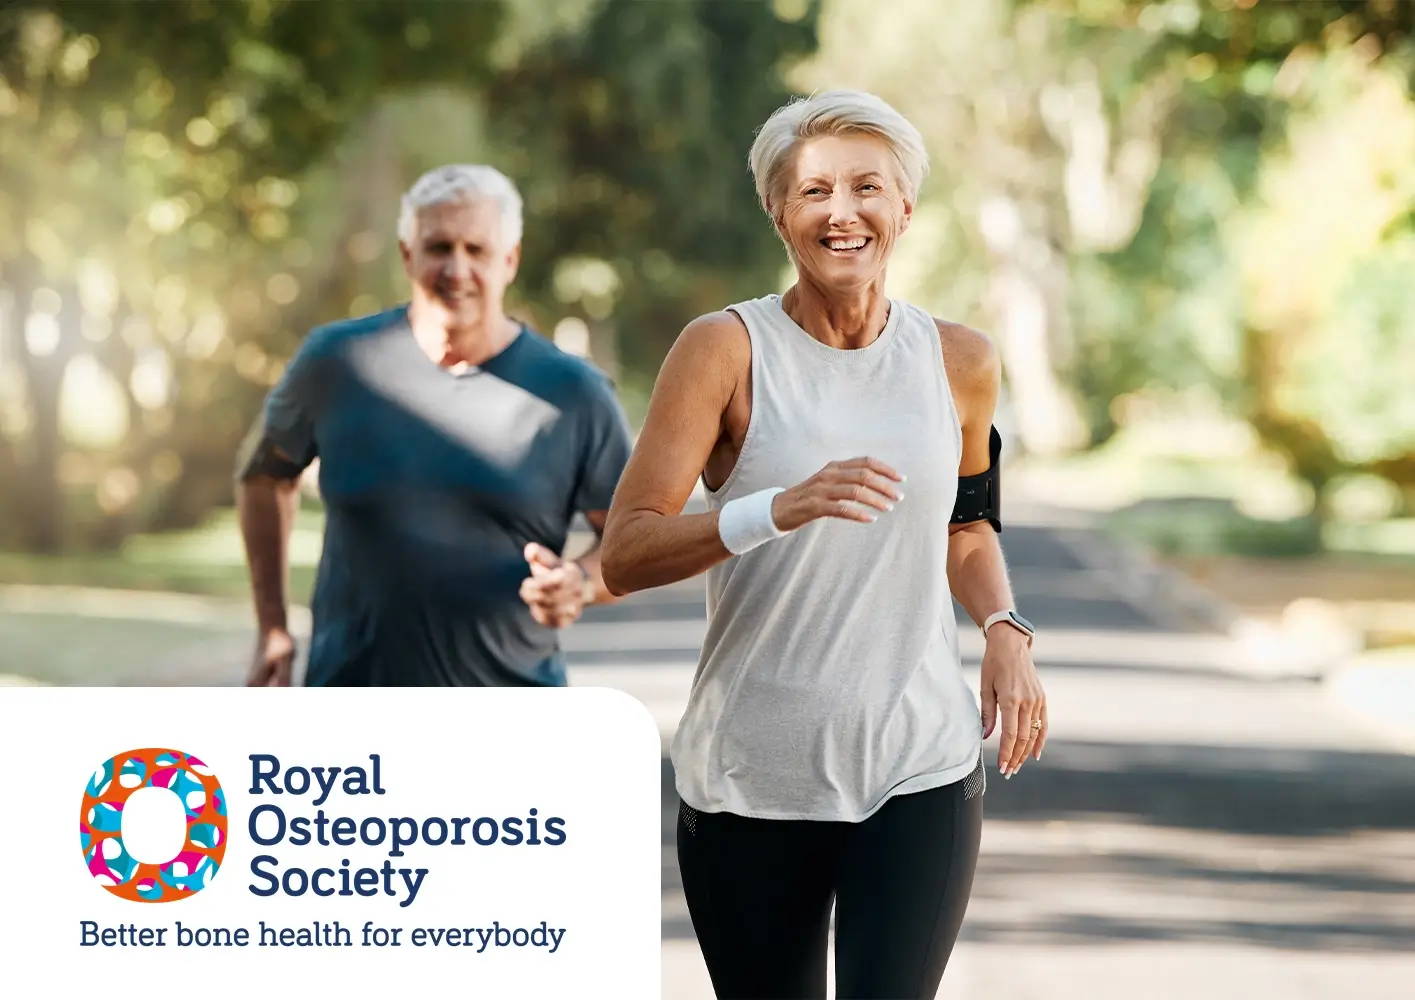 Exclusive Royal Osteoporosis Society Membership Offer